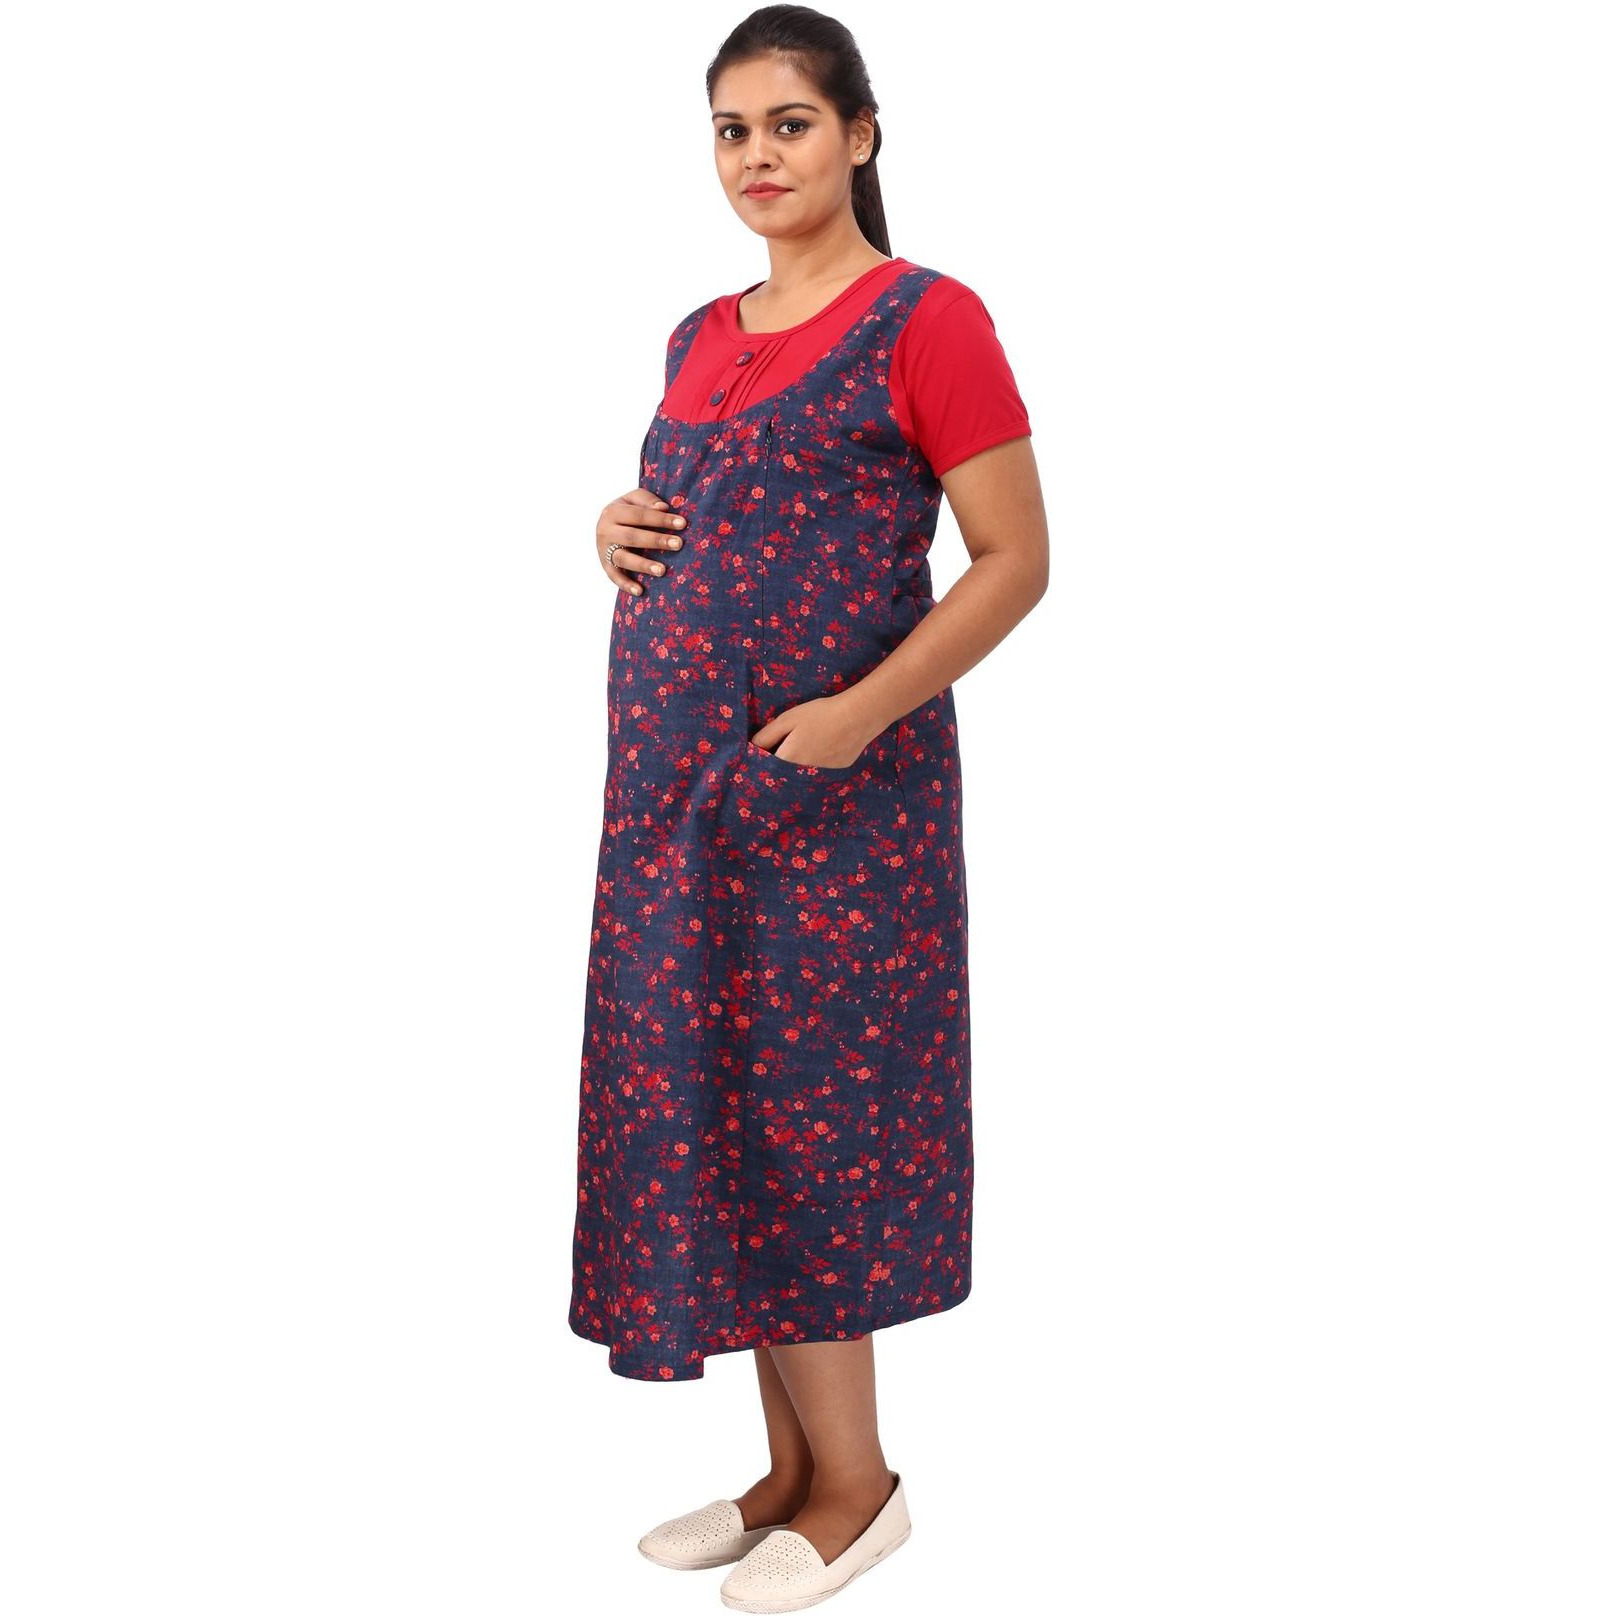 Mamma's Maternity Women's Cotton Red and Blue Maternity Dress (Size:M)